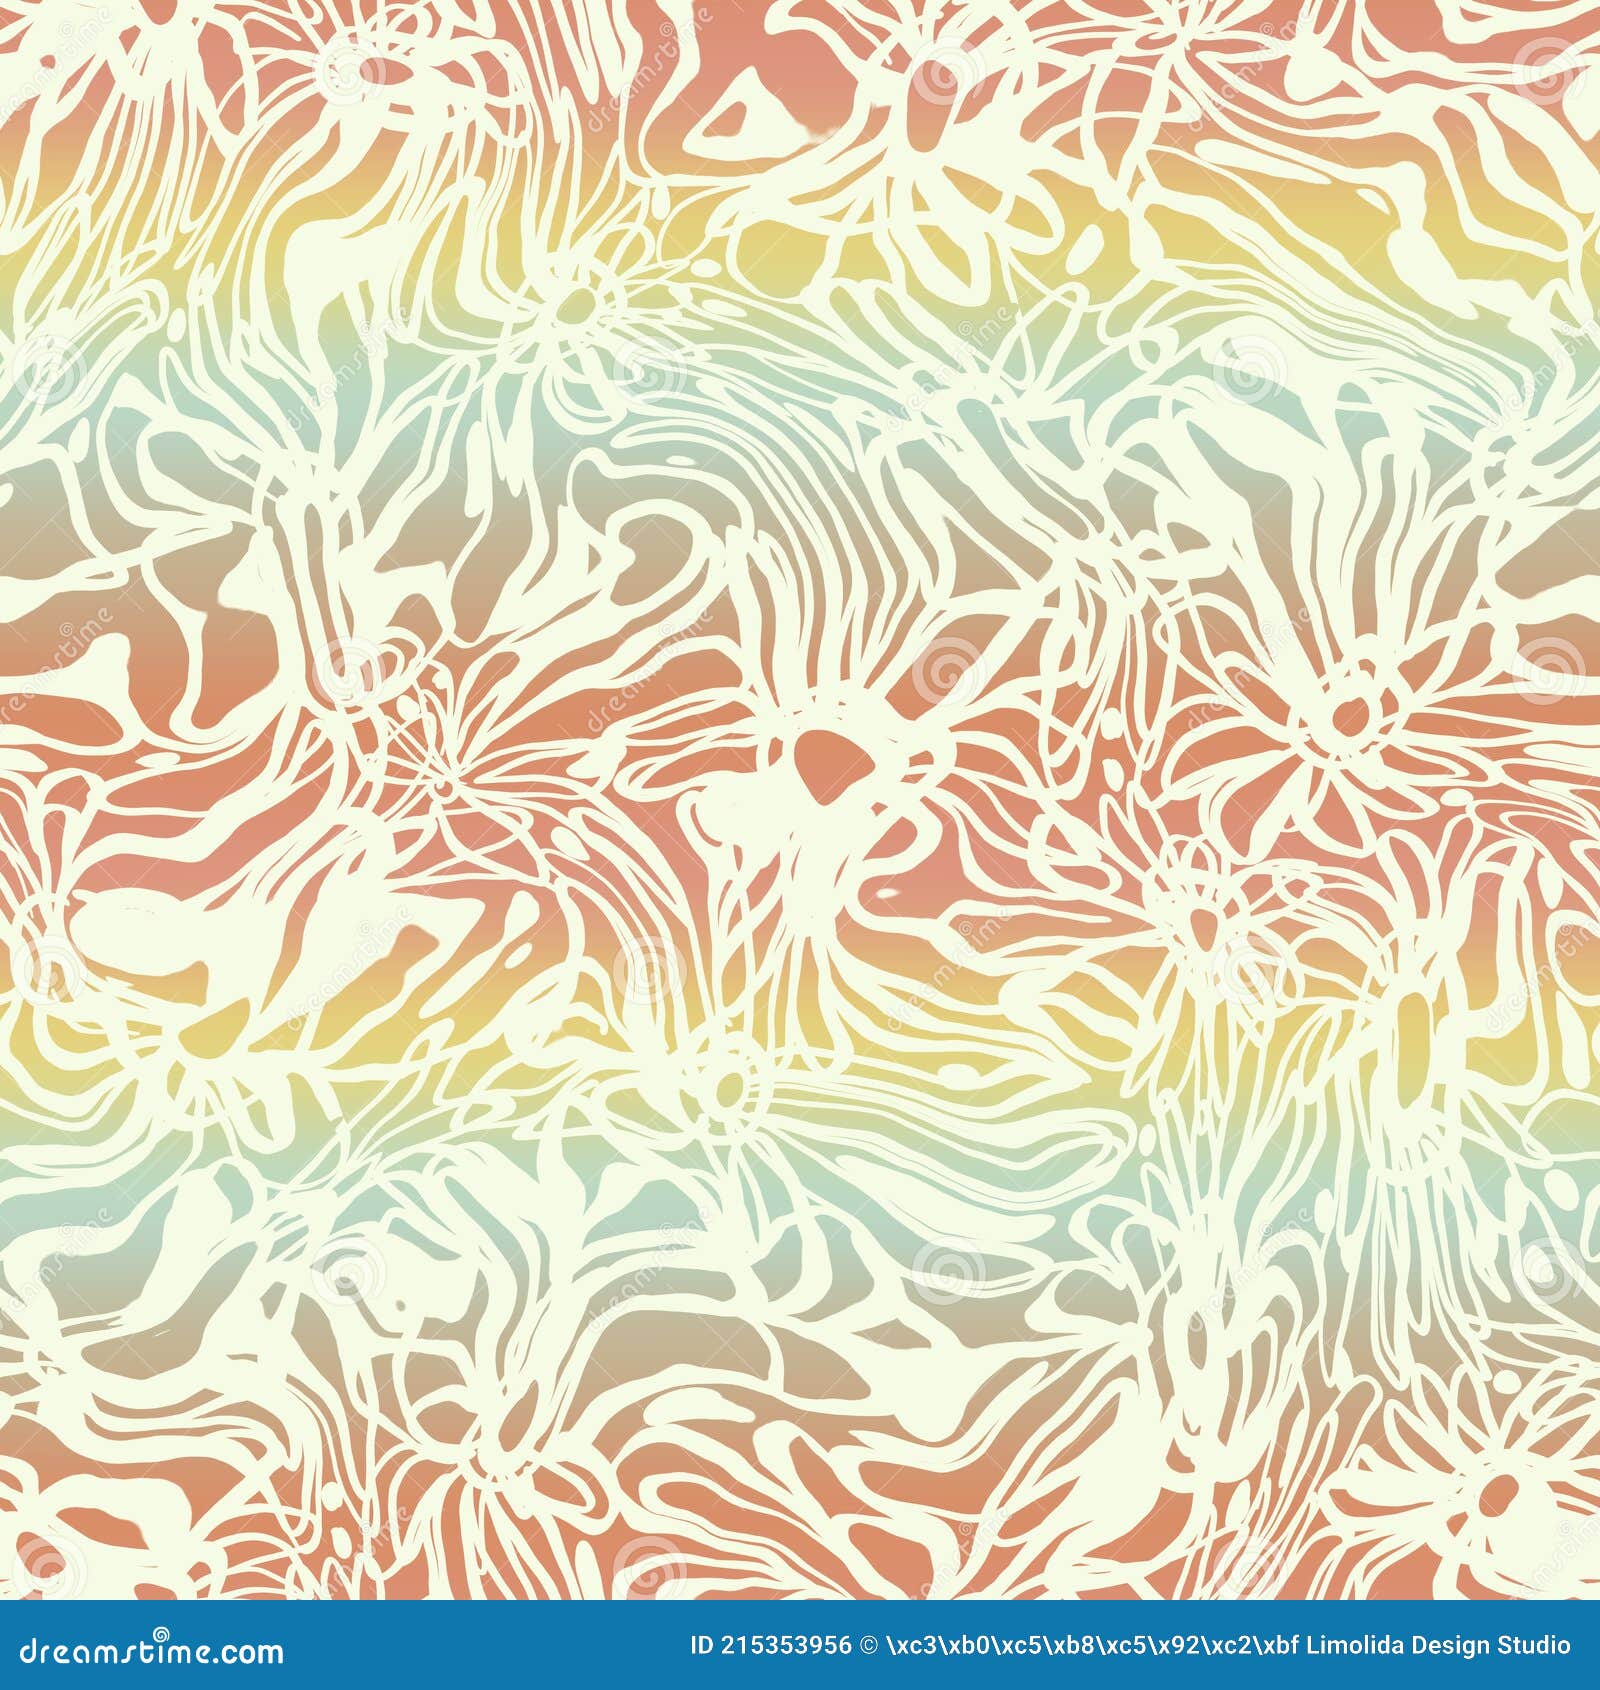 https://thumbs.dreamstime.com/z/horizontal-blurry-ombre-blend-textured-stripe-background-variegated-pastel-line-melange-seamless-pattern-abstract-all-over-print-215353956.jpg